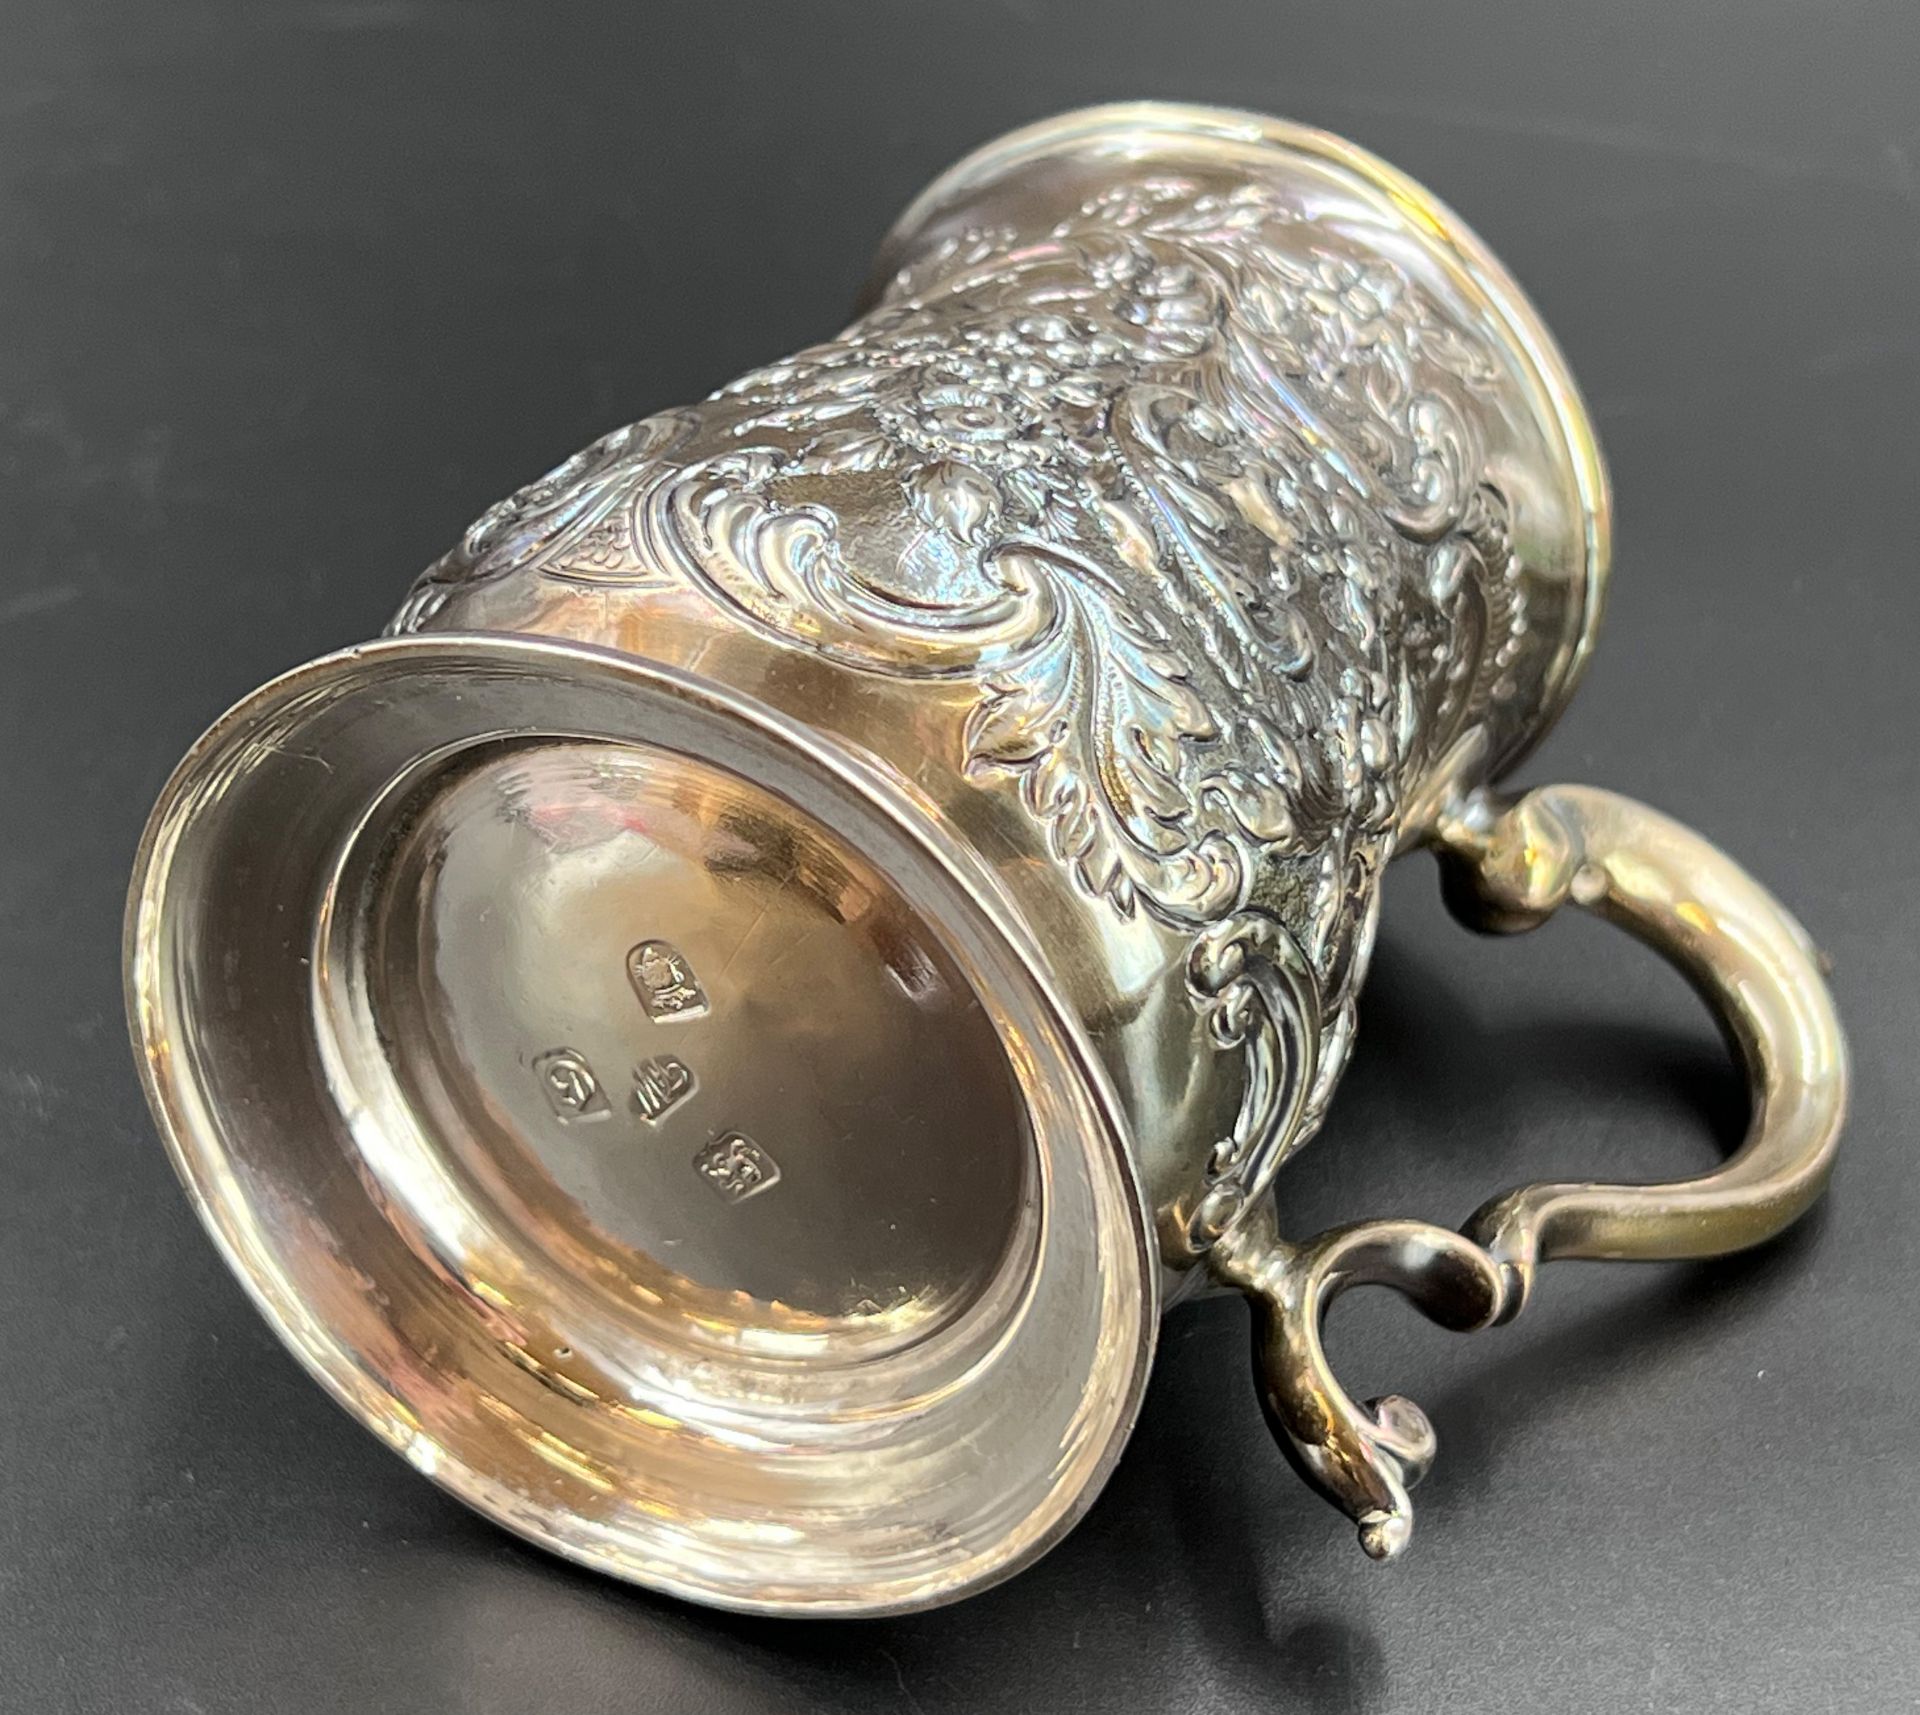 Antique silver cup. 925 Sterling silver. England. 1762. - Image 5 of 9